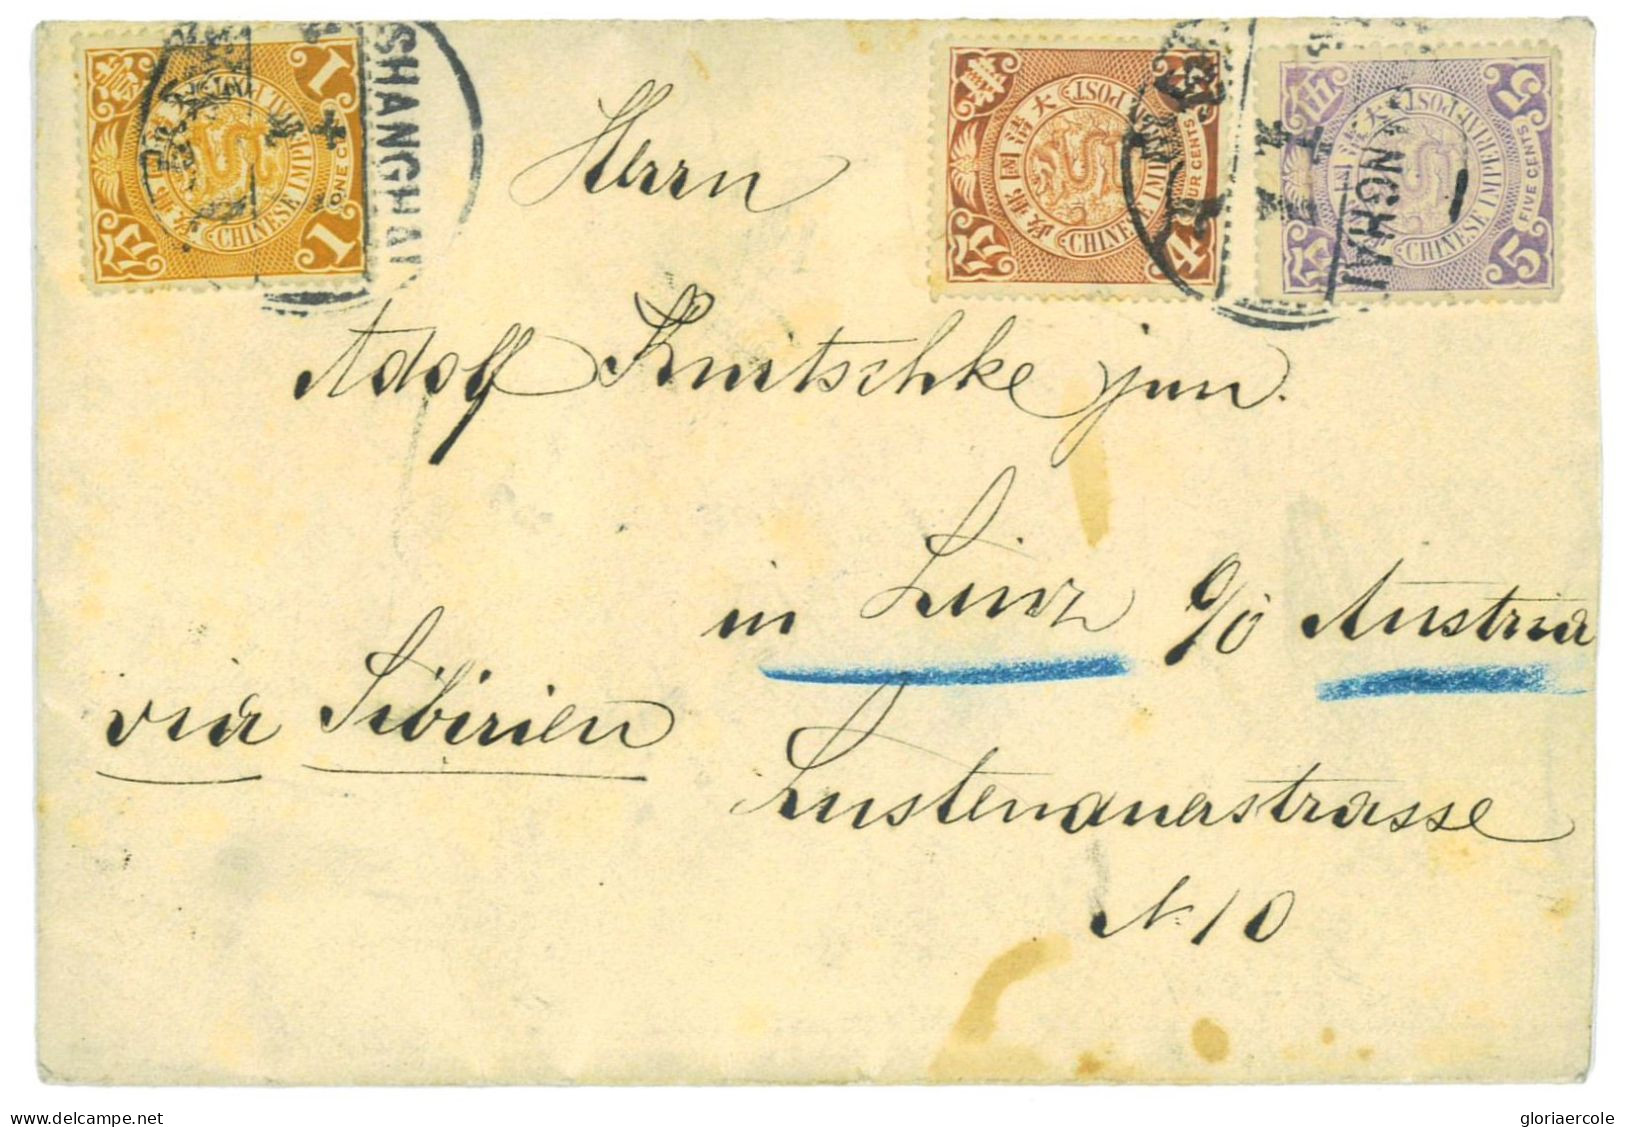 P2774 - 3 COLOUR ENVELOPPE FROM SHANGAI TO AUSTRIA 1909 - Covers & Documents